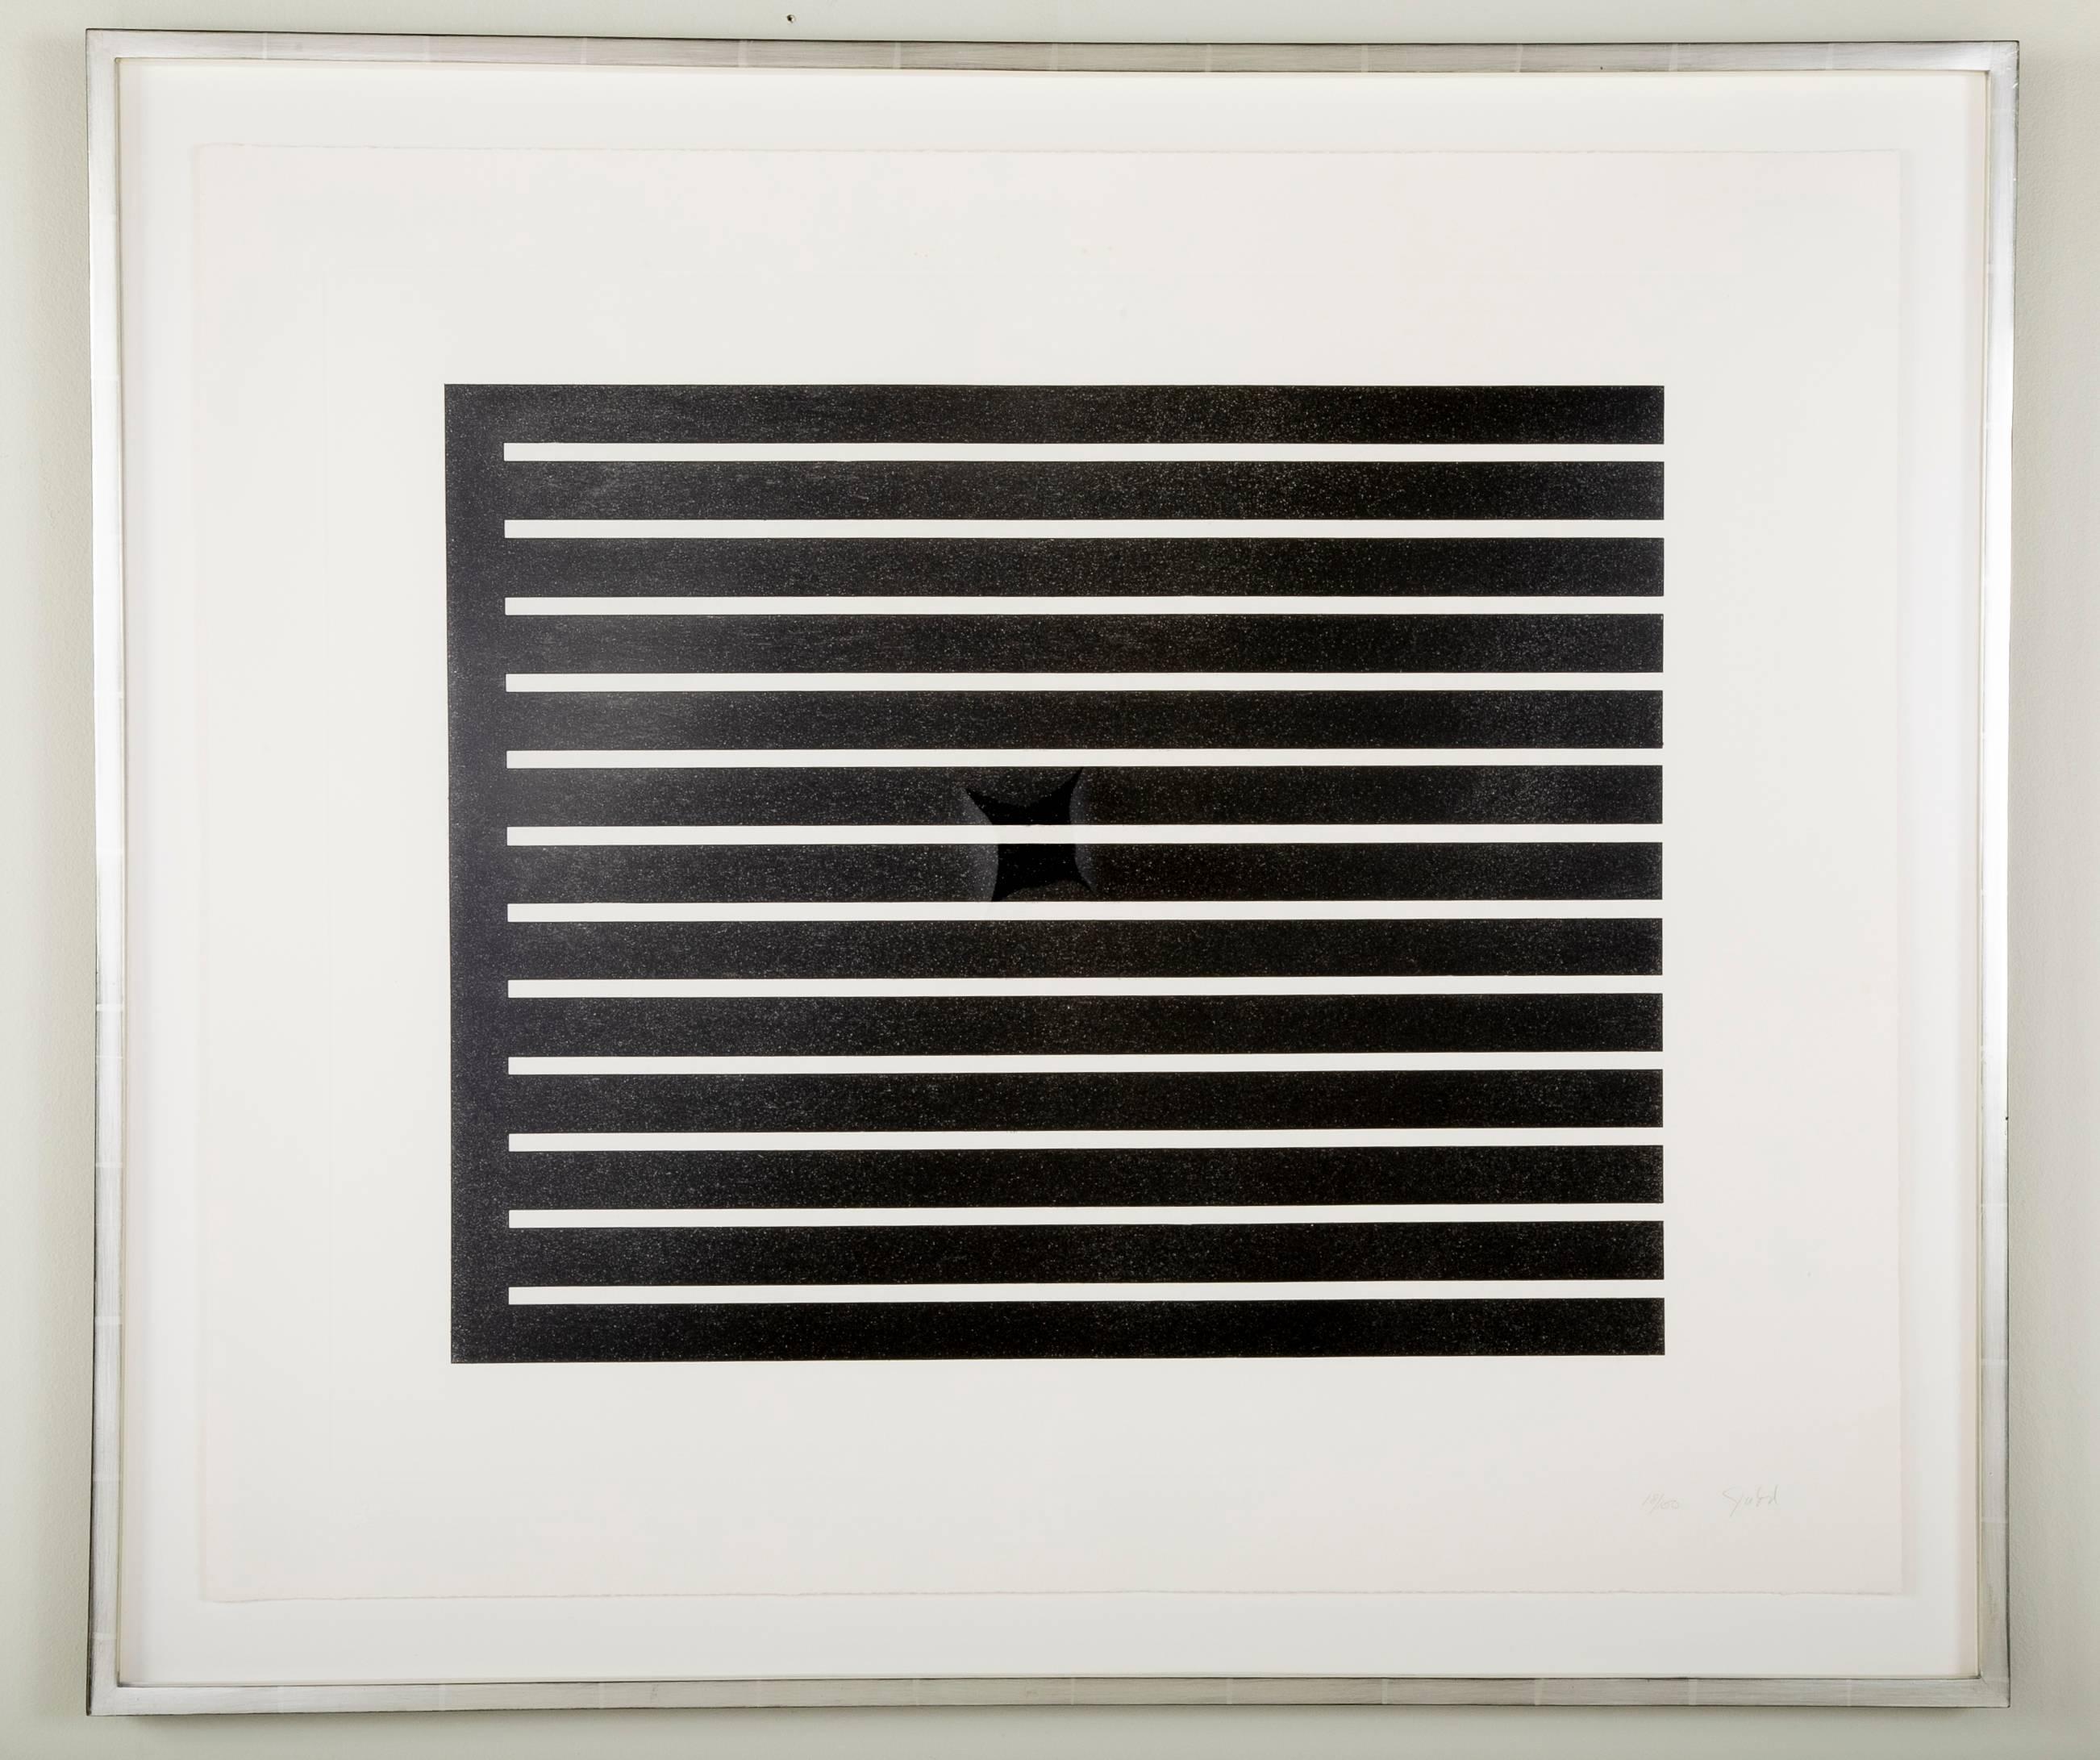 American Collection of Three Untitled Donal Judd Aquatint Prints Sold Individually